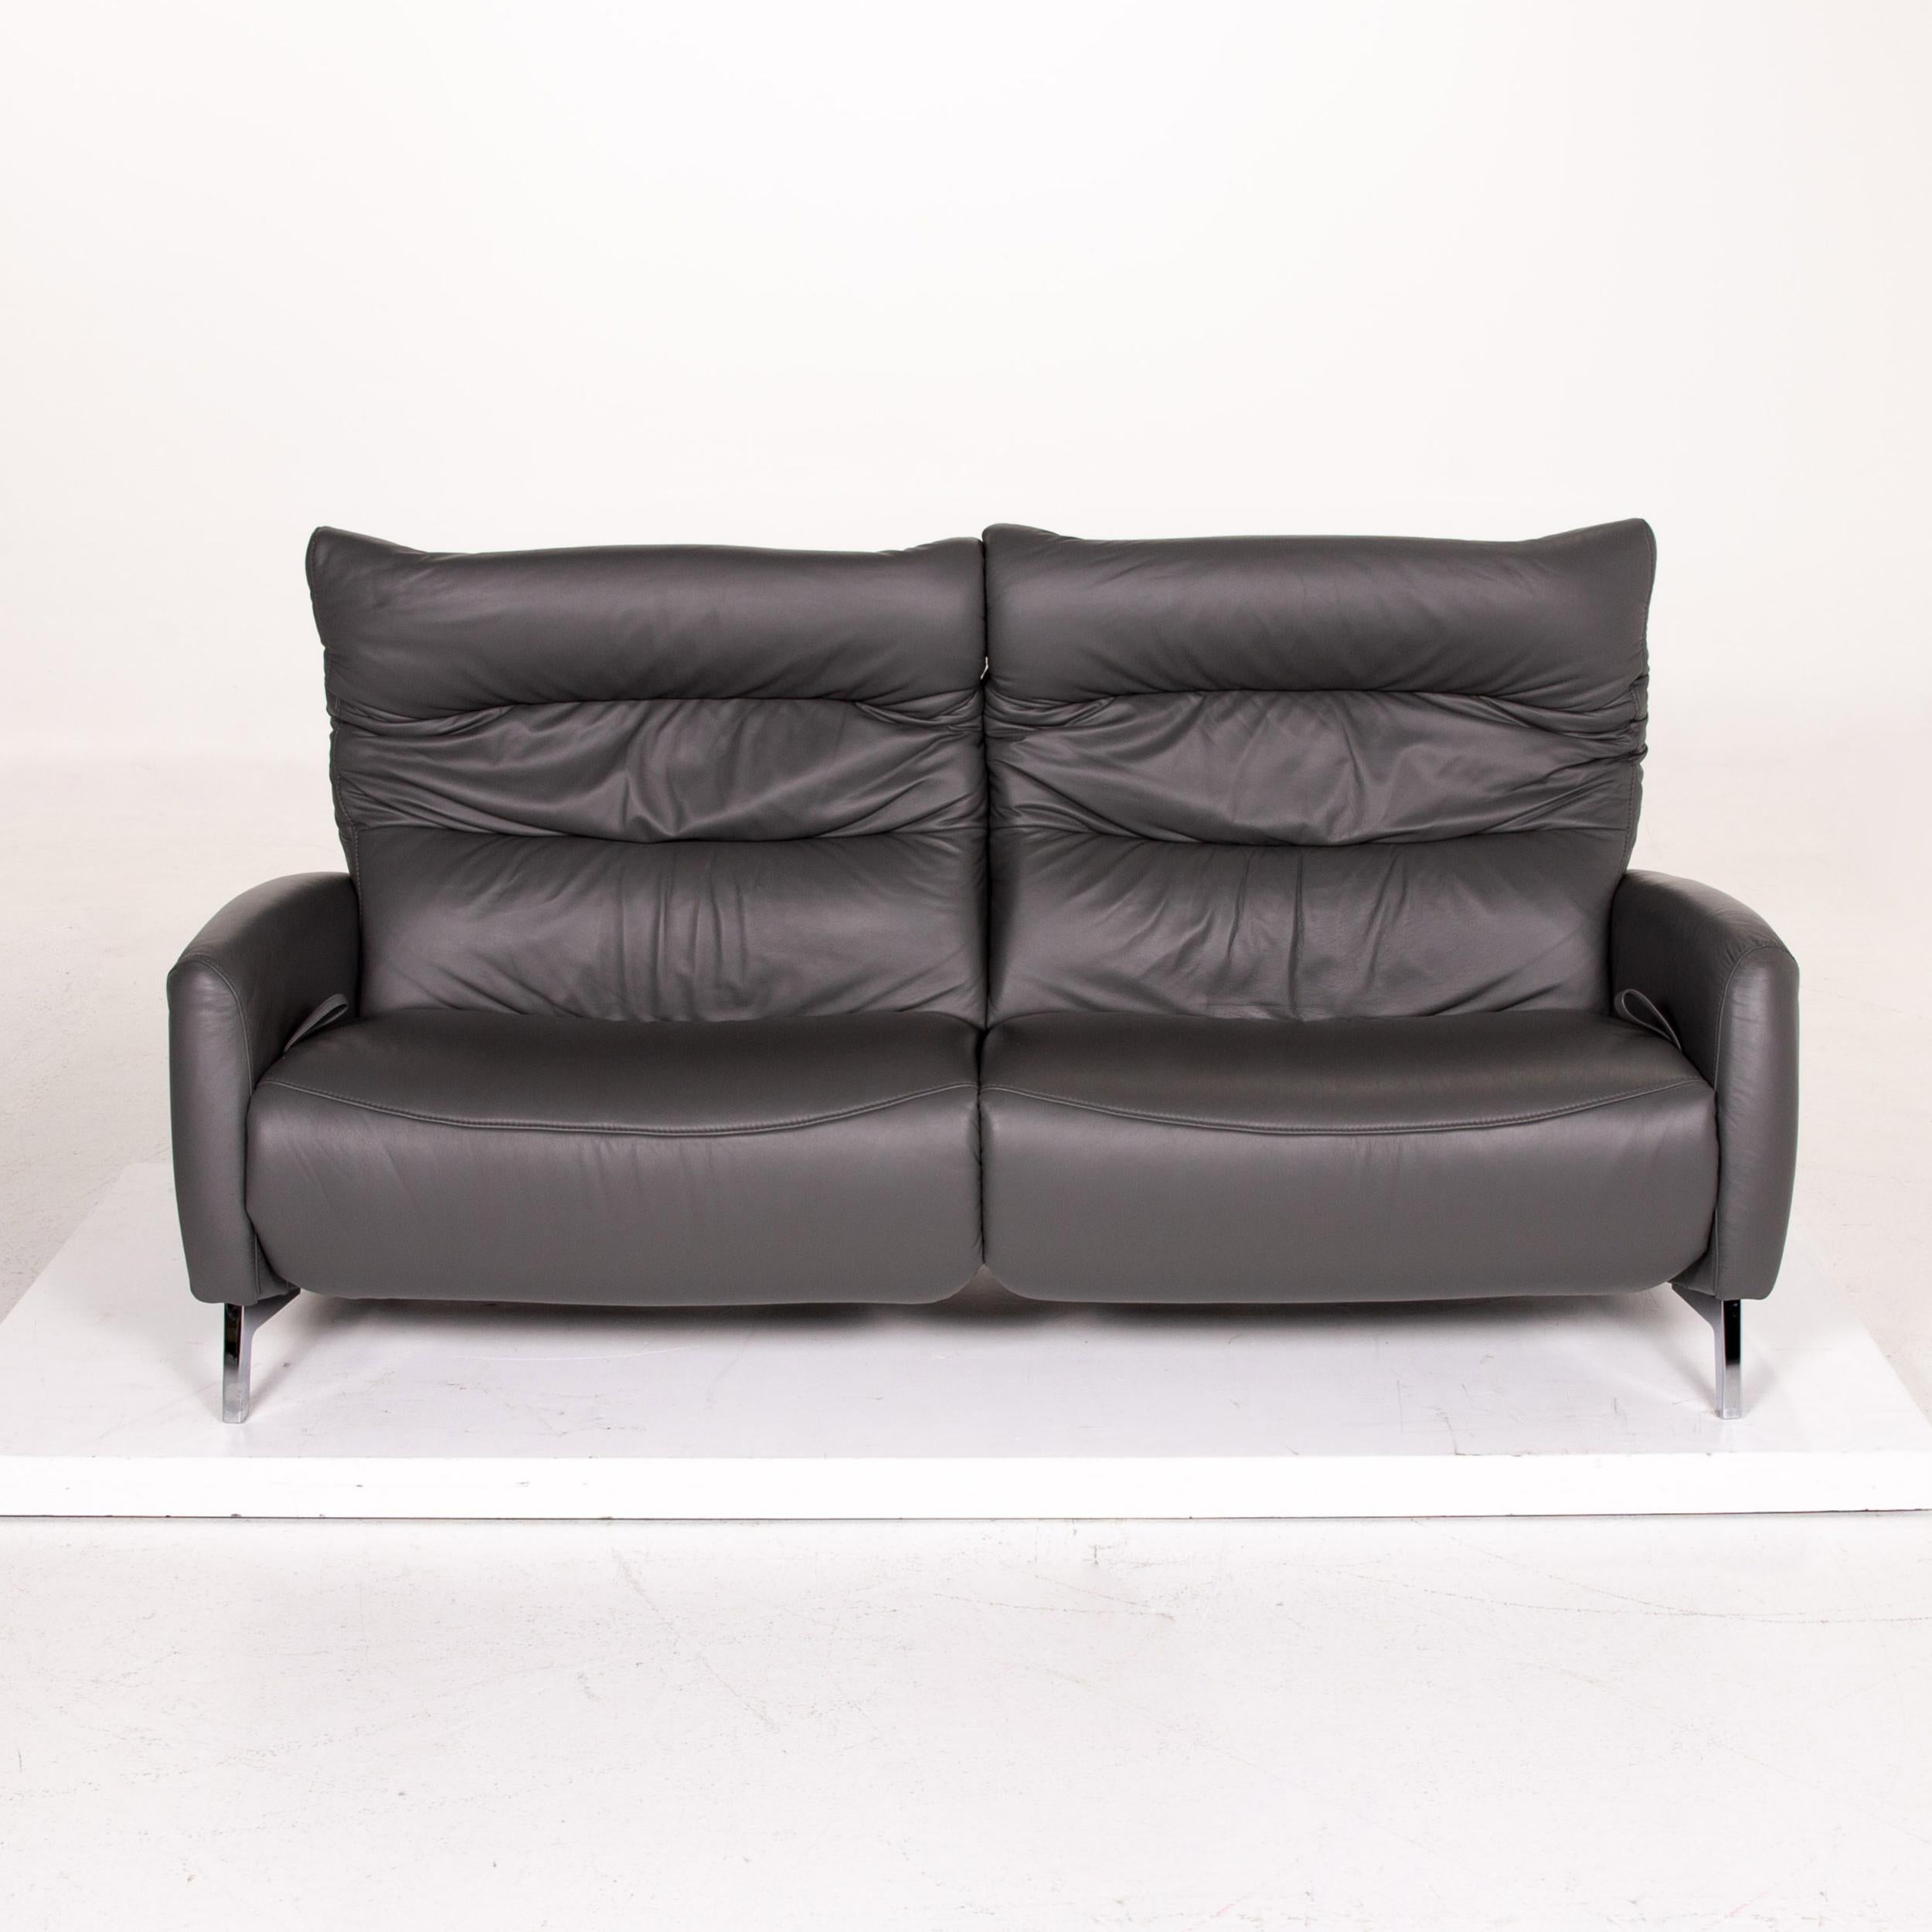 Mondo Recero Leather Sofa Gray Two-Seat Function Relax Function Couch 2